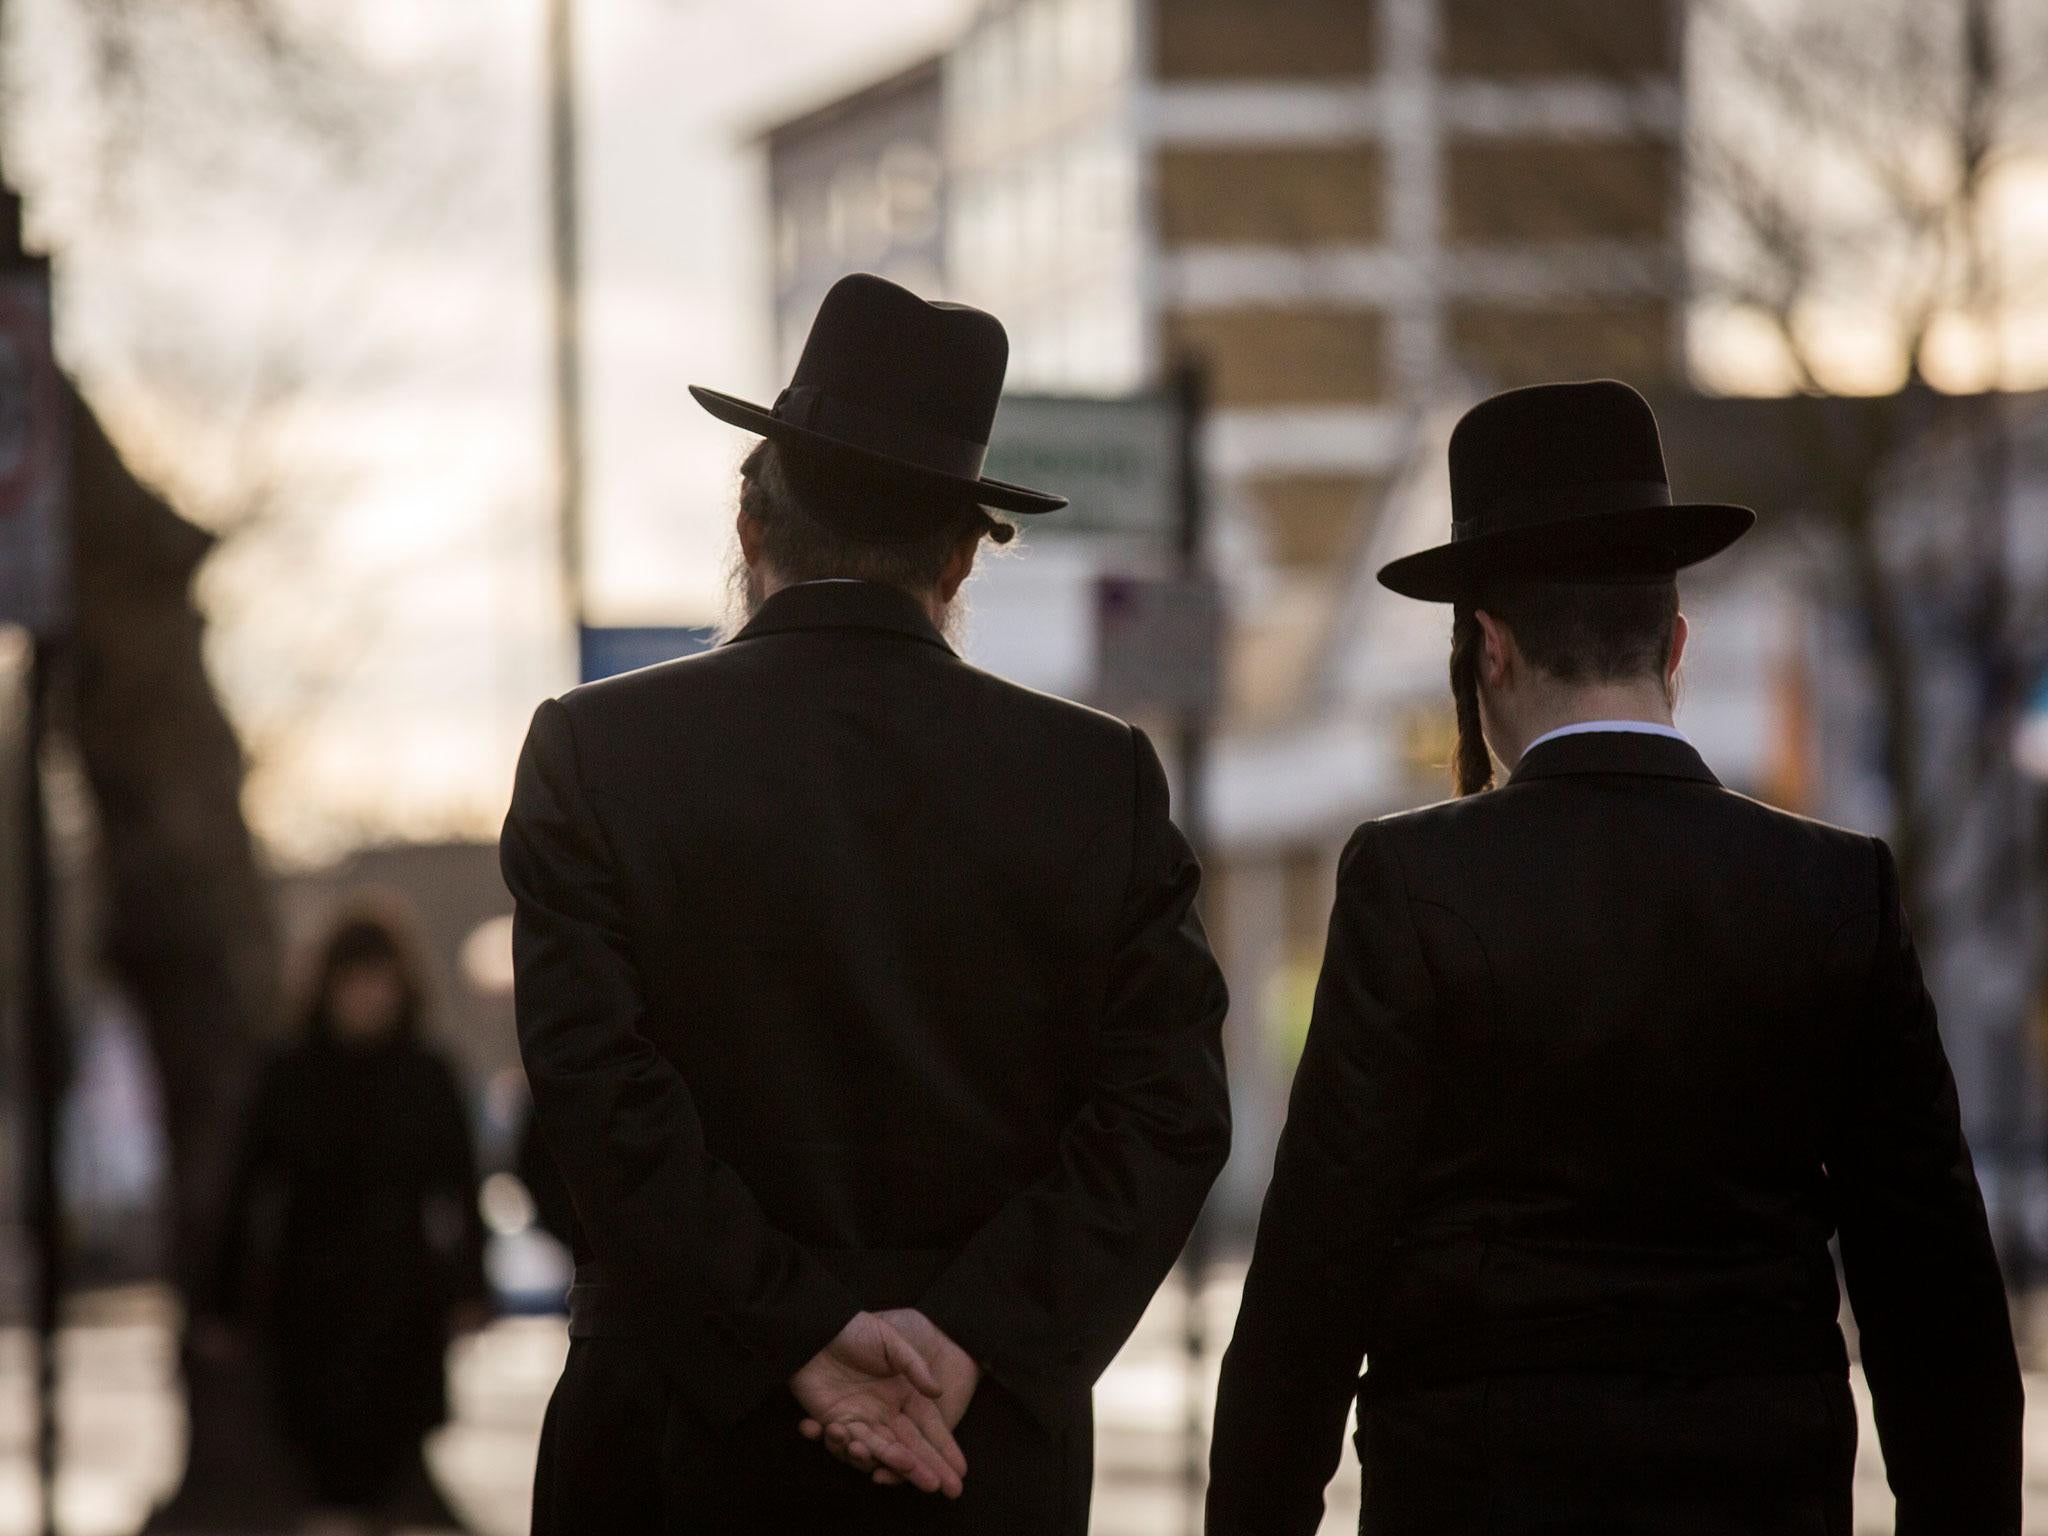 Jewish people are being targeted in the street in ‘random’ attacks